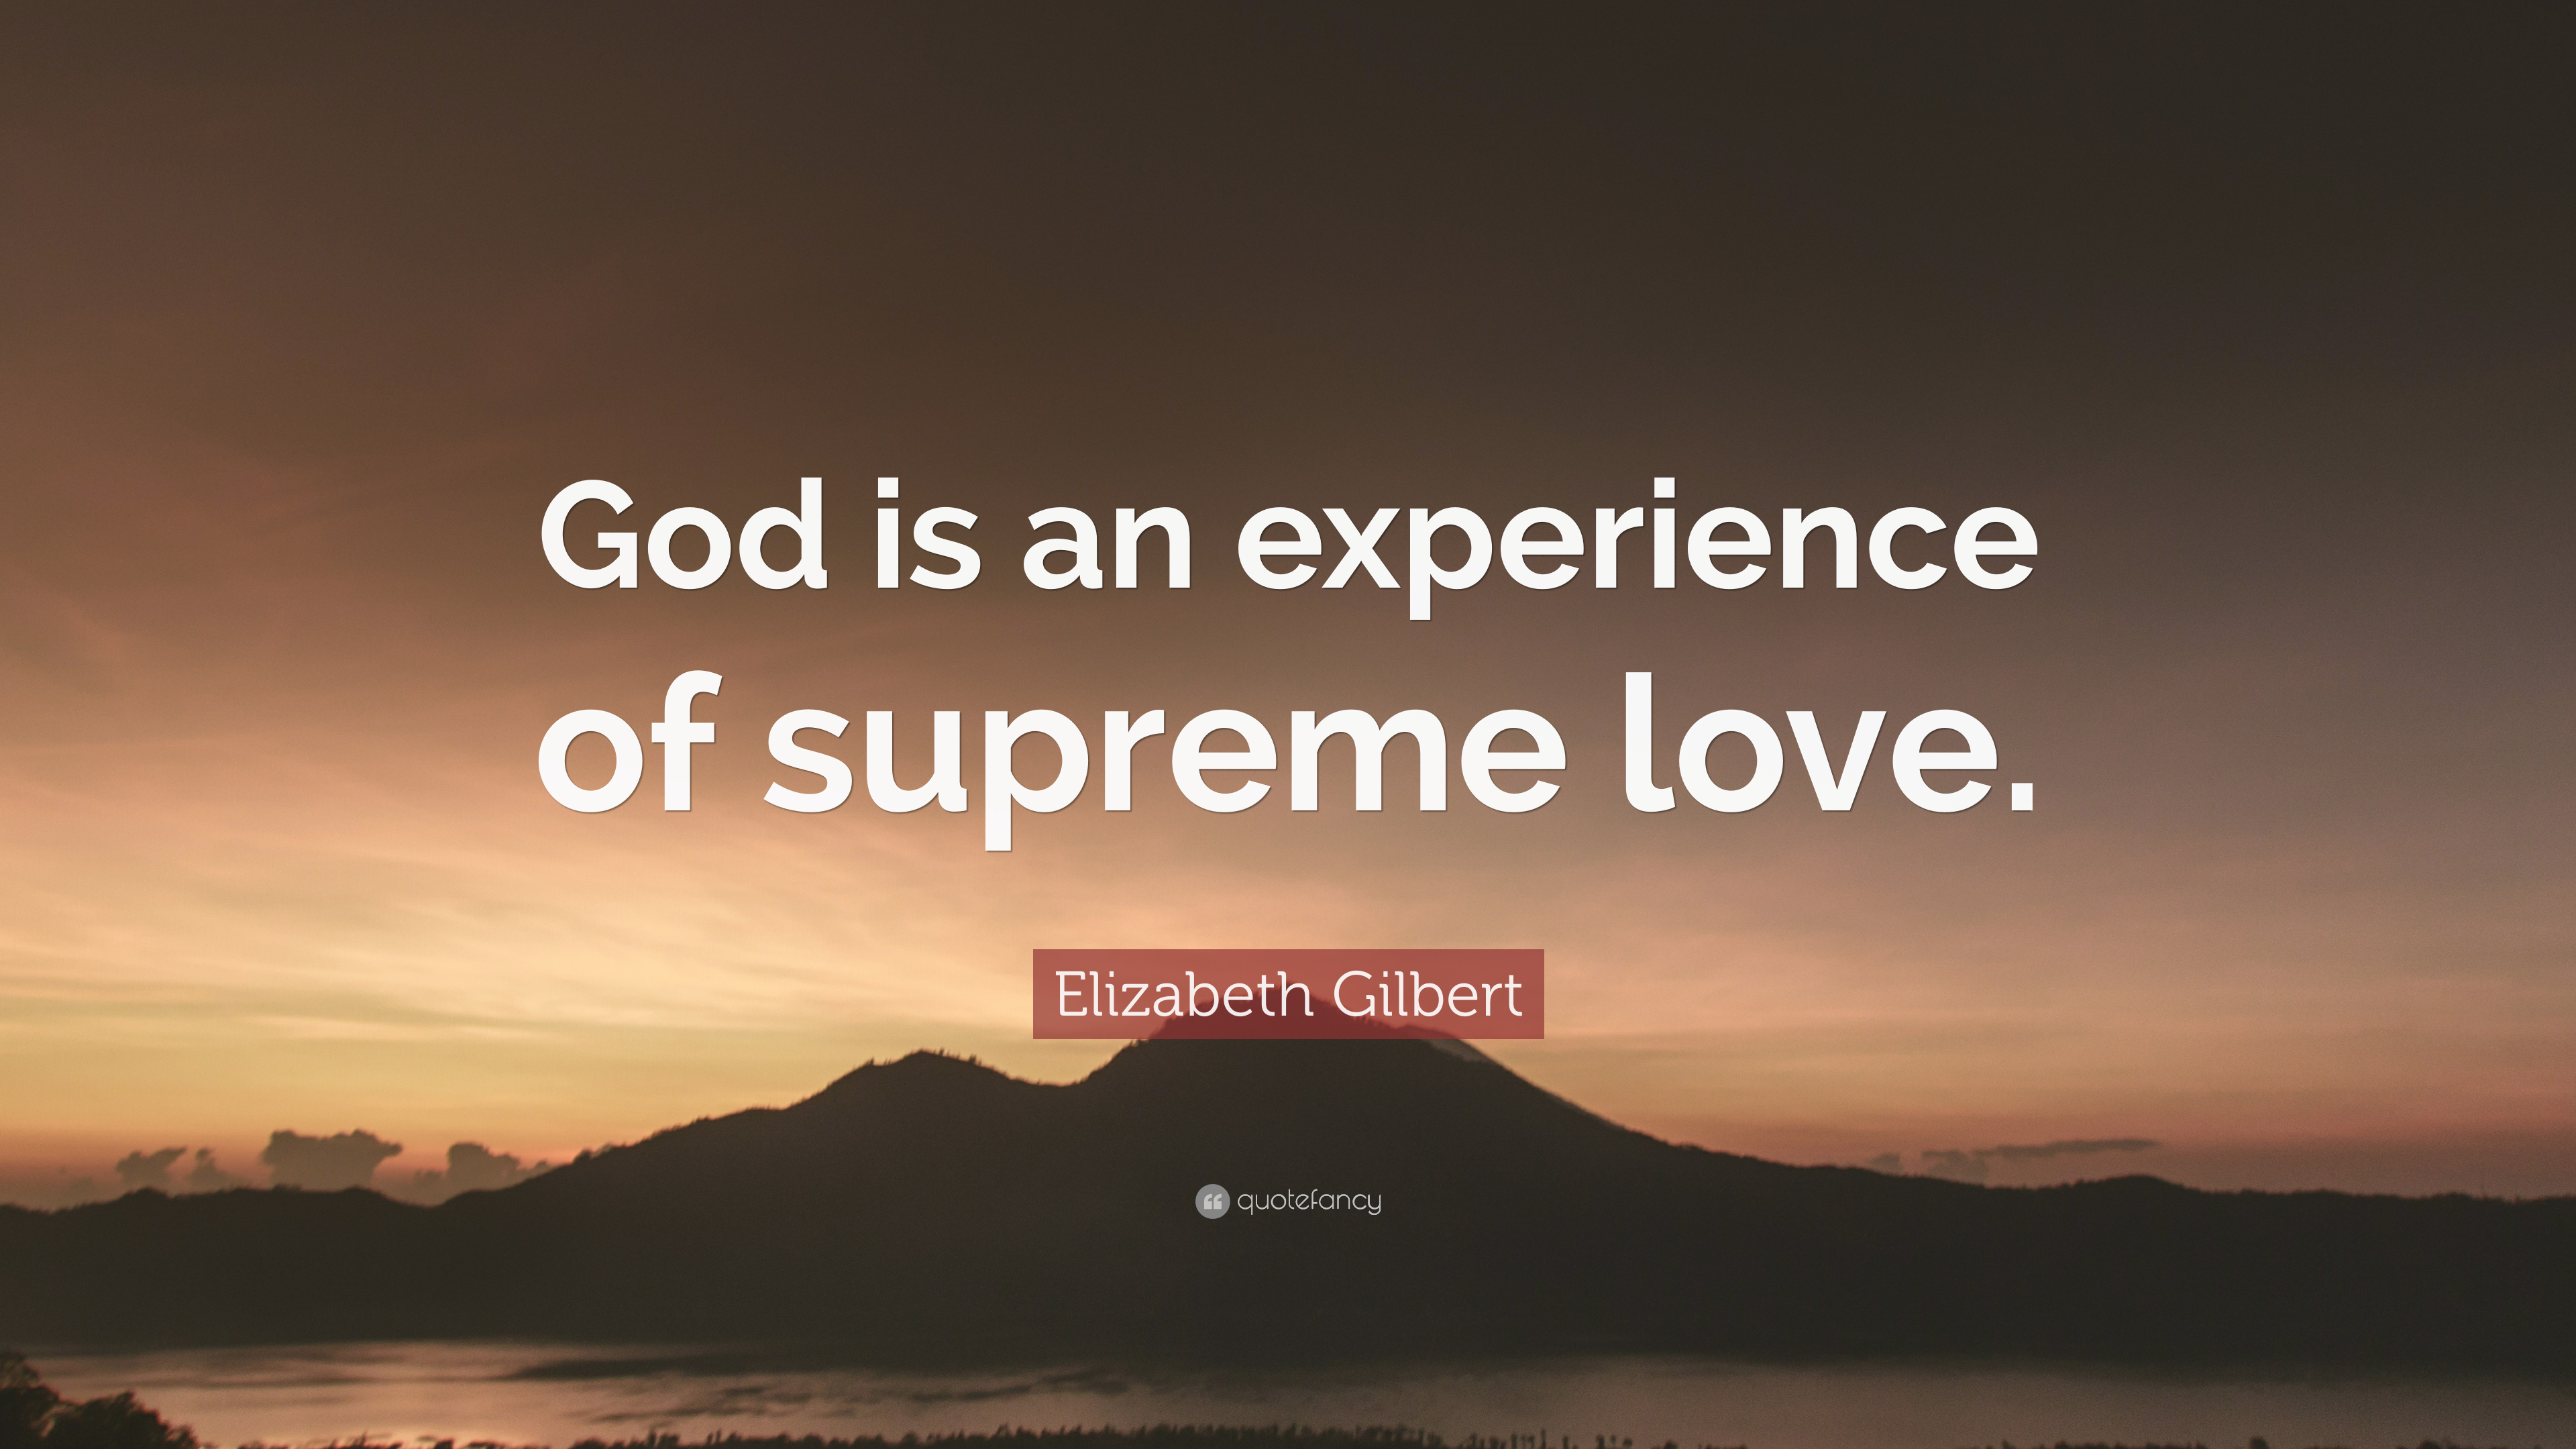 Elizabeth Gilbert Quote: “God is an experience of supreme